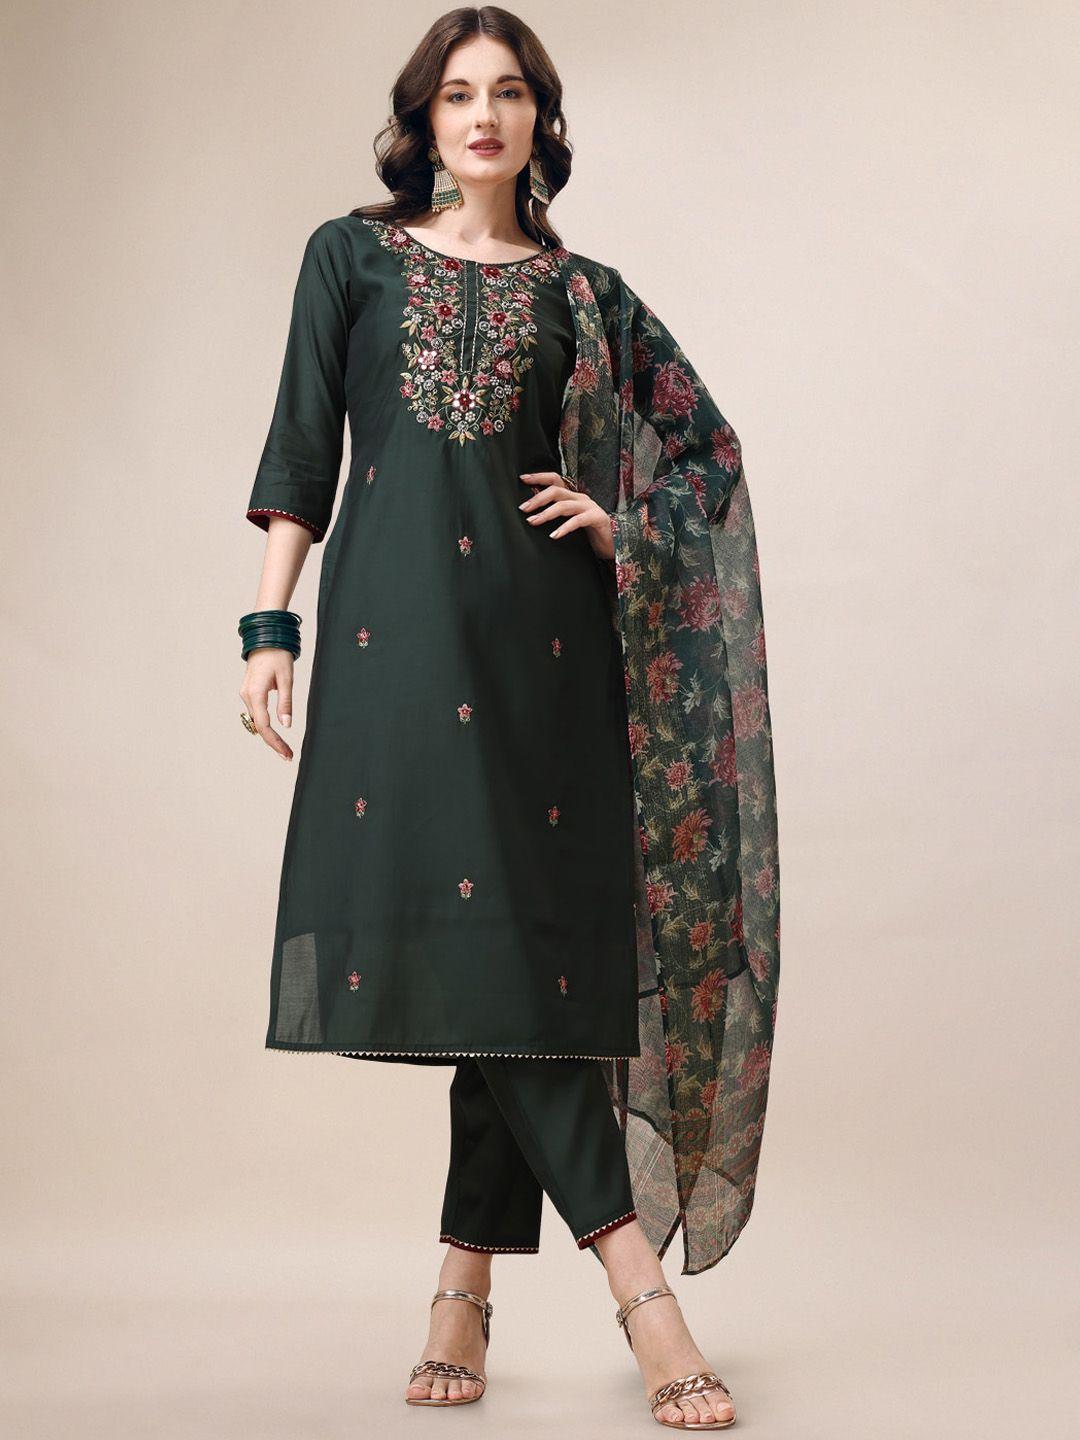 berrylicious floral embroidered chanderi cotton straight kurta & trousers with dupatta